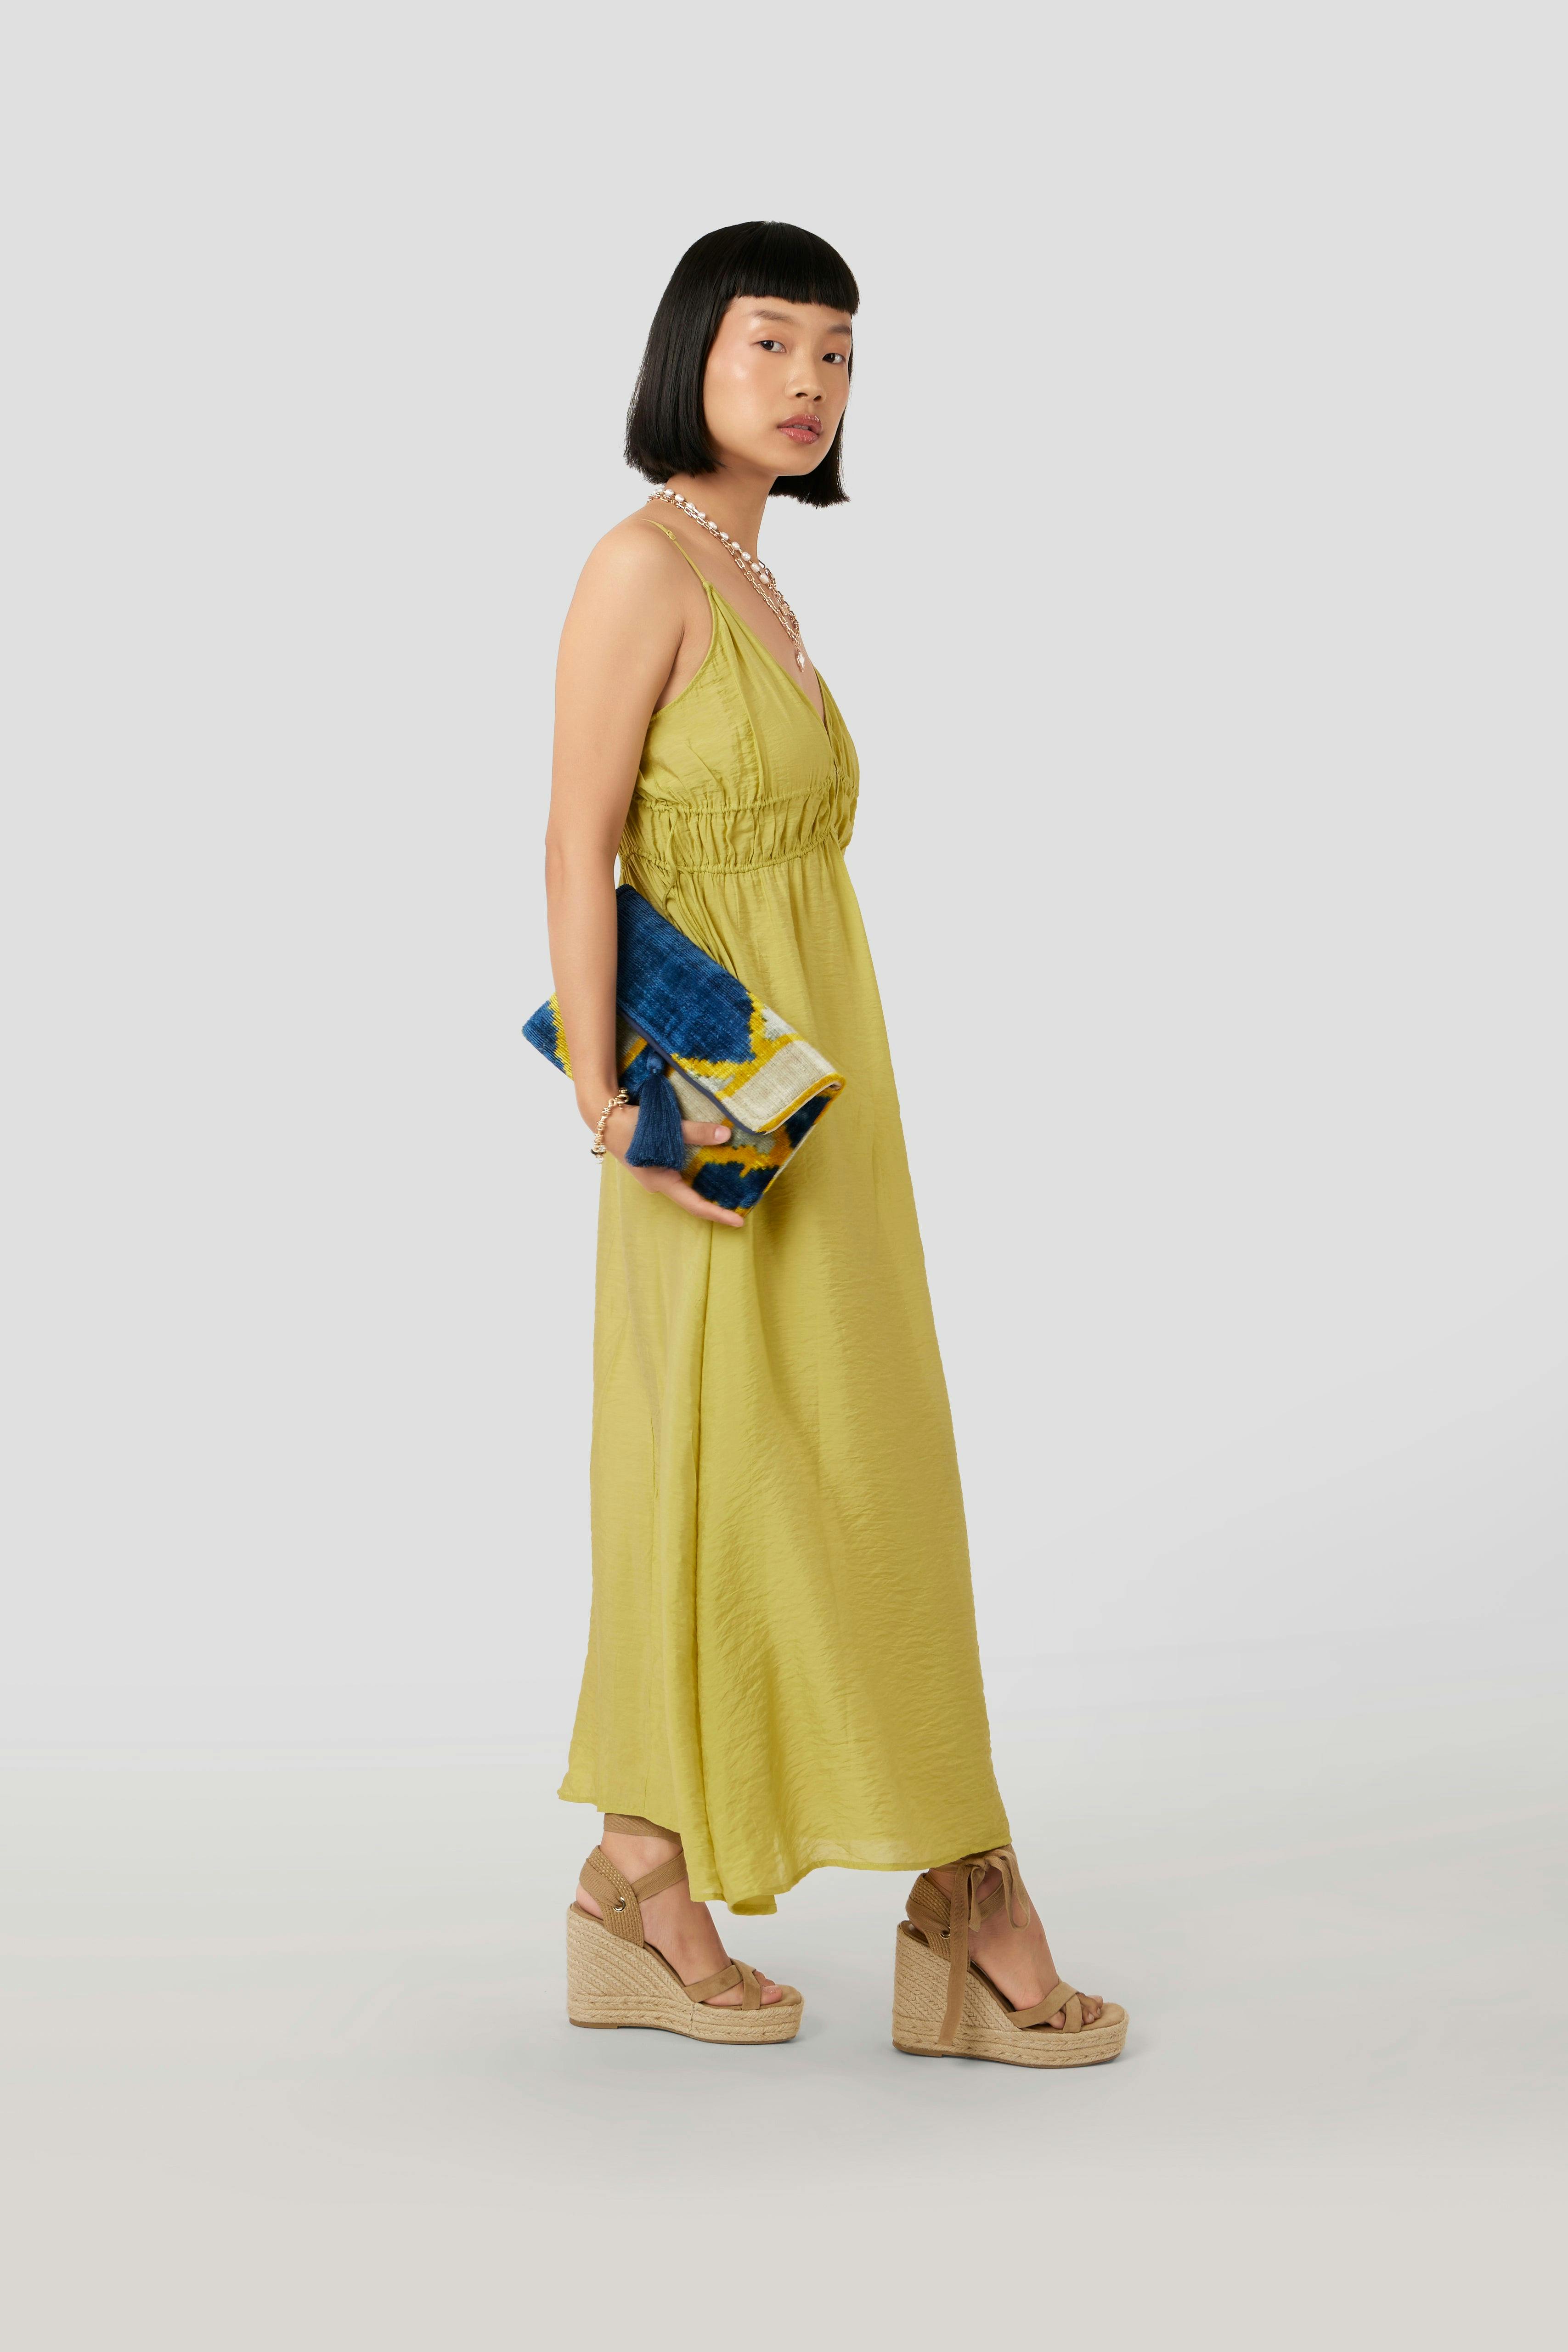 Electric Blue & Yellow Velvet Silk Fold Over Clutch, a product by JENA